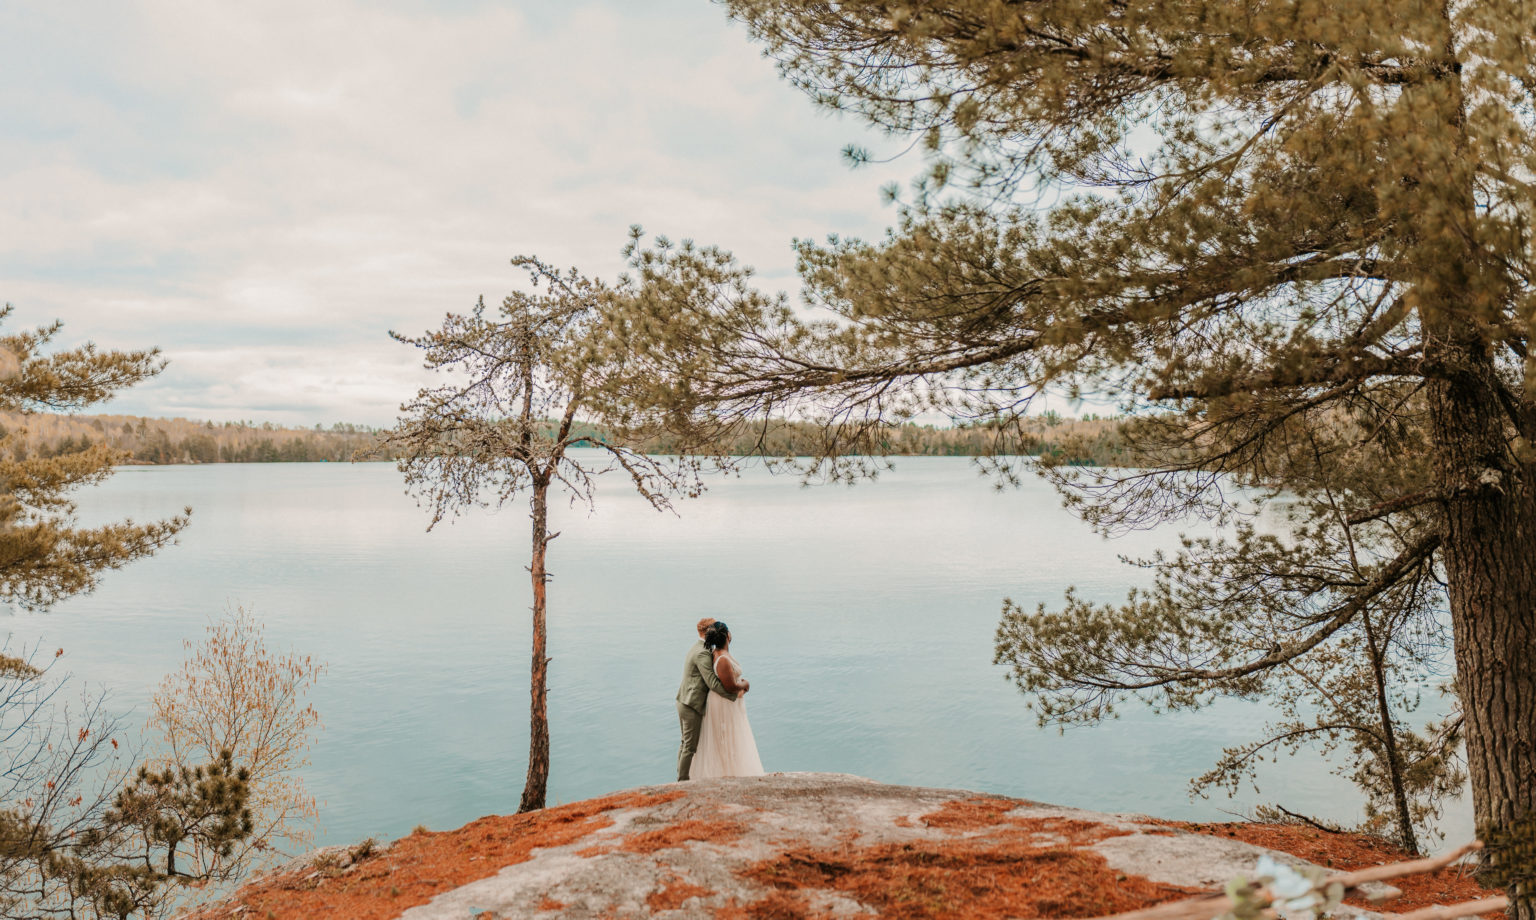 Couple holding each other and looking out onto the lake during their elopement.